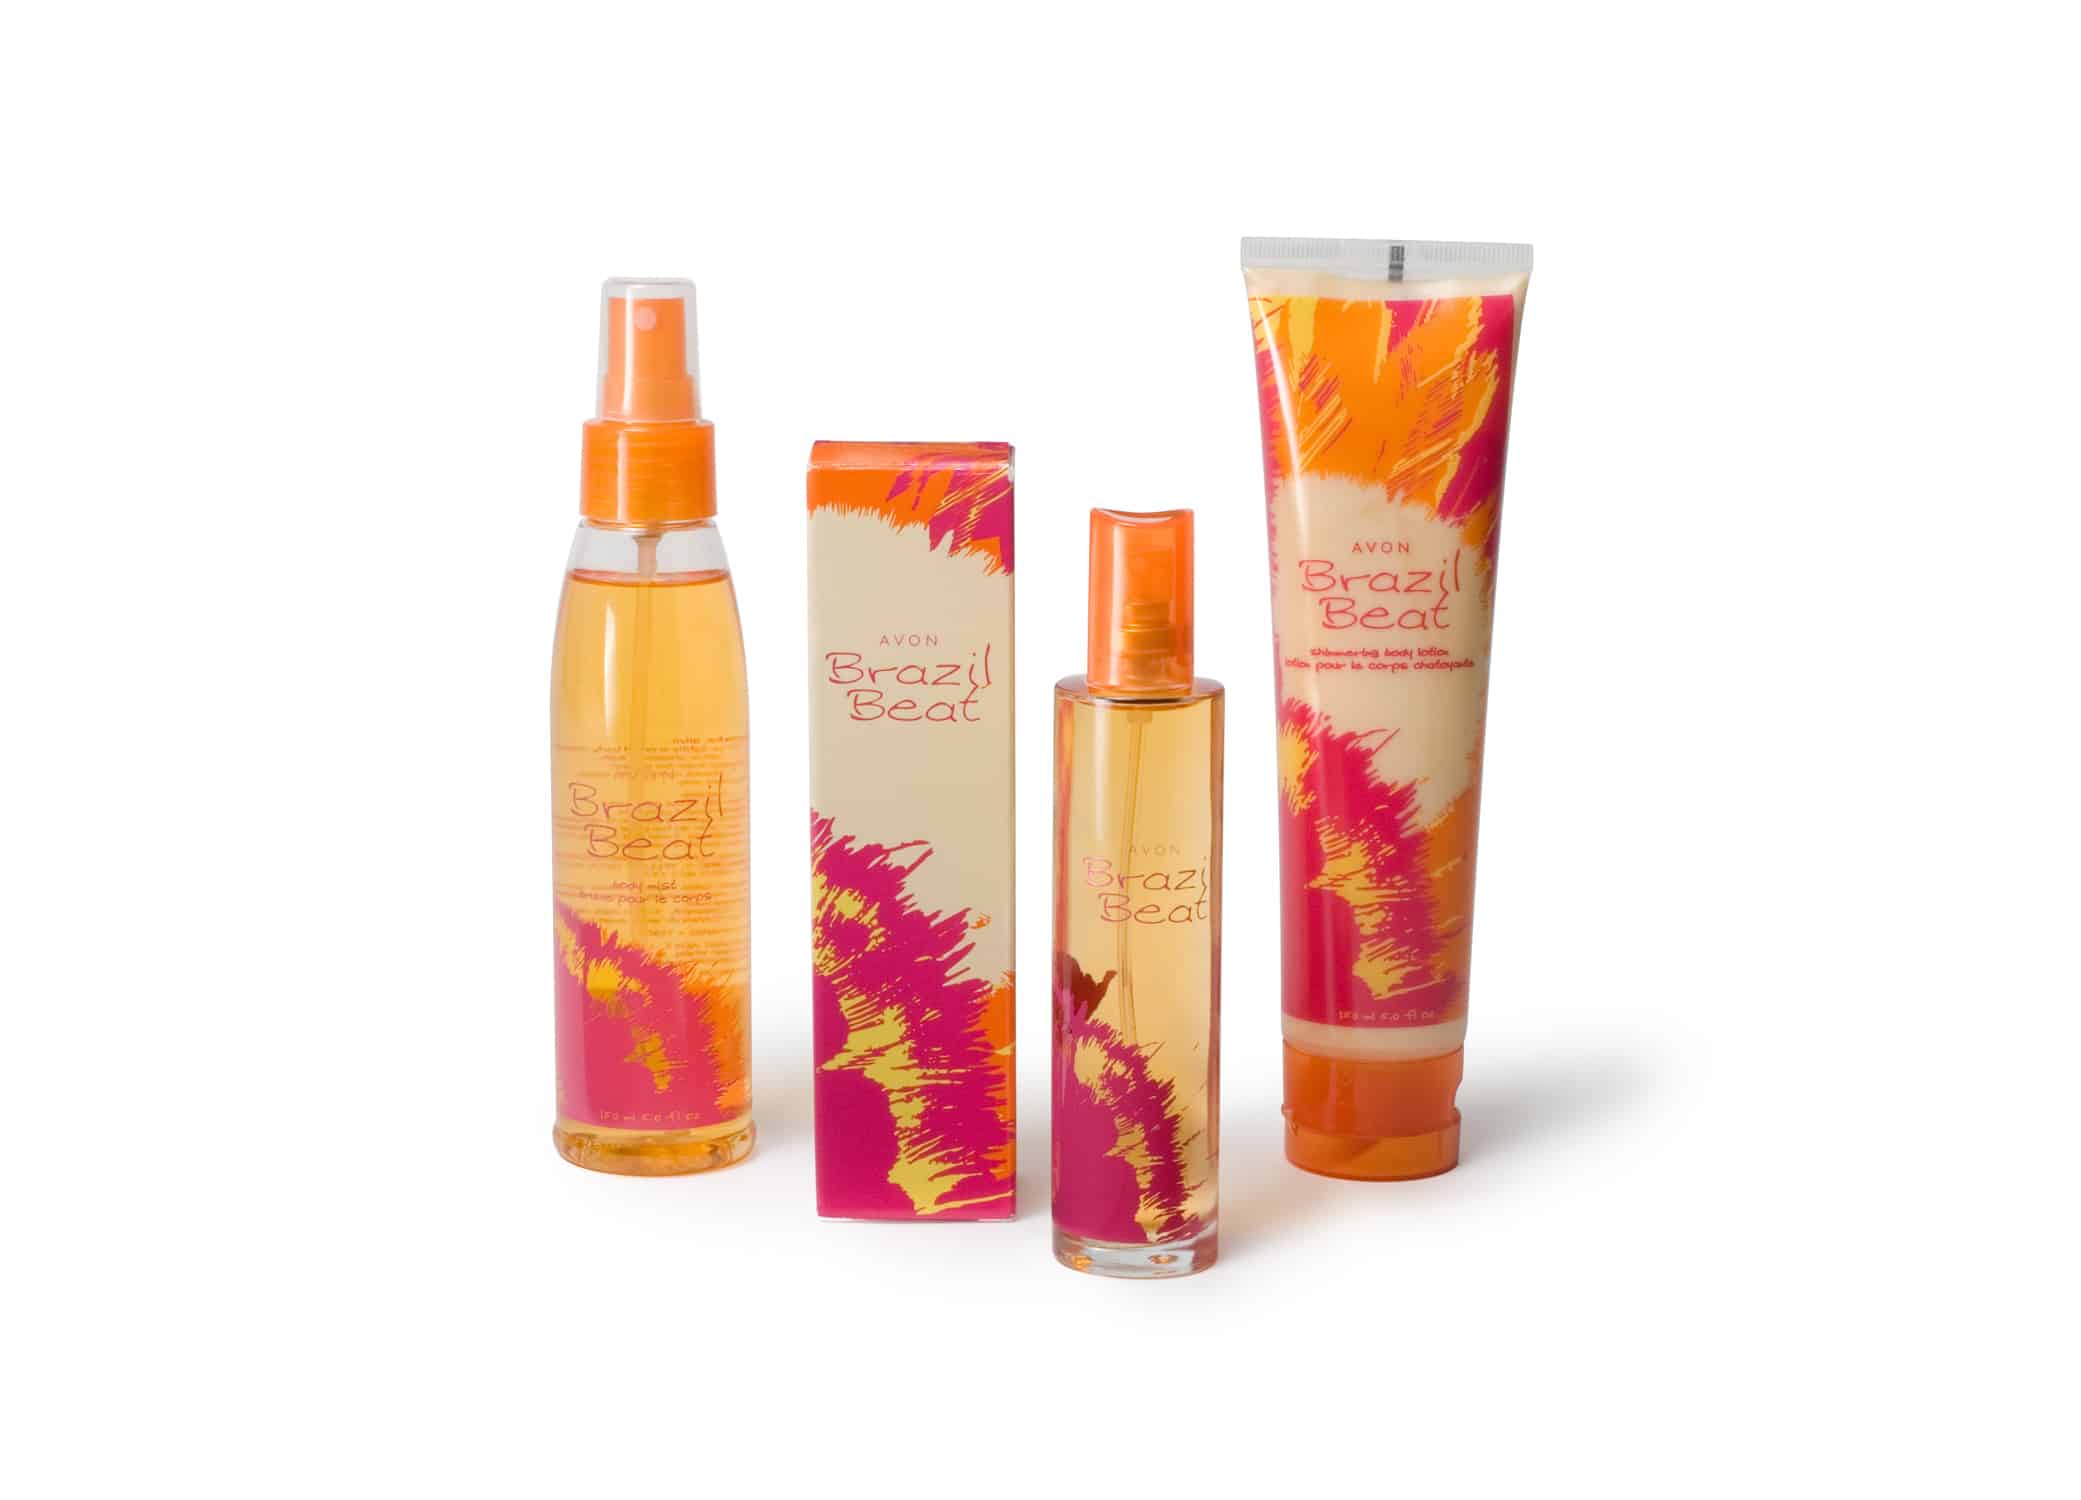 Creative perfume packaging design for Avon Brazil Beat with vibrant oranges and magenta feathered details on bottle.